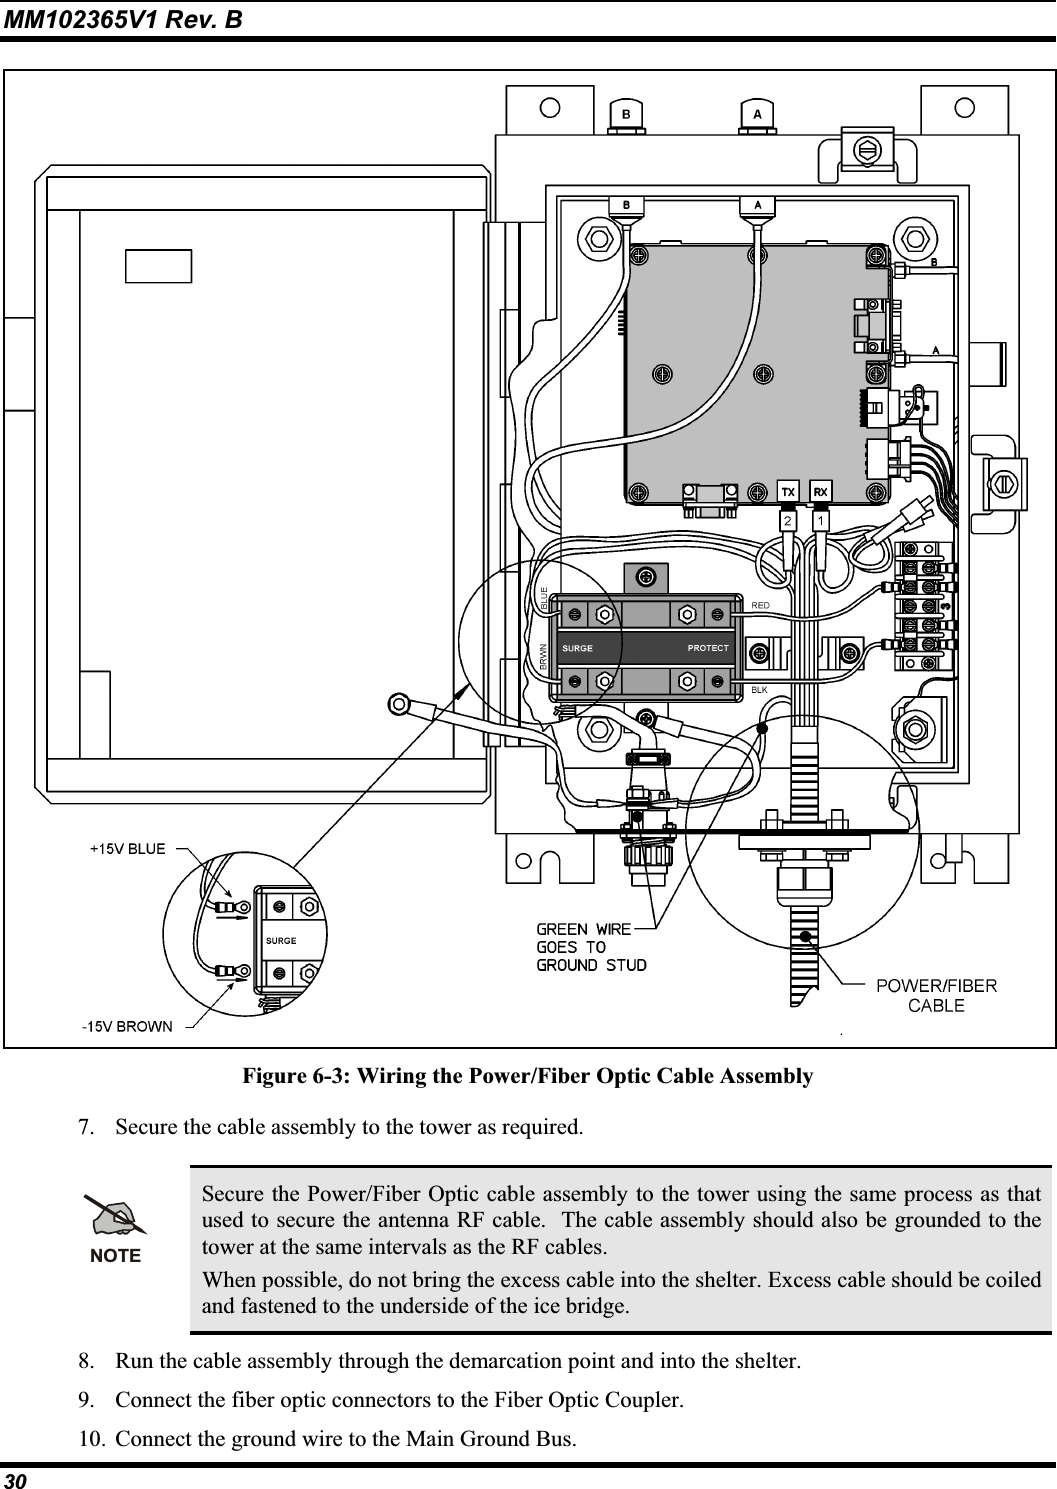 MM102365V1 Rev. B Figure 6-3: Wiring the Power/Fiber Optic Cable Assembly 7. Secure the cable assembly to the tower as required. NOTESecure the Power/Fiber Optic cable assembly to the tower using the same process as that used to secure the antenna RF cable.  The cable assembly should also be grounded to the tower at the same intervals as the RF cables.When possible, do not bring the excess cable into the shelter. Excess cable should be coiled and fastened to the underside of the ice bridge. 8. Run the cable assembly through the demarcation point and into the shelter. 9. Connect the fiber optic connectors to the Fiber Optic Coupler. 10. Connect the ground wire to the Main Ground Bus. 30